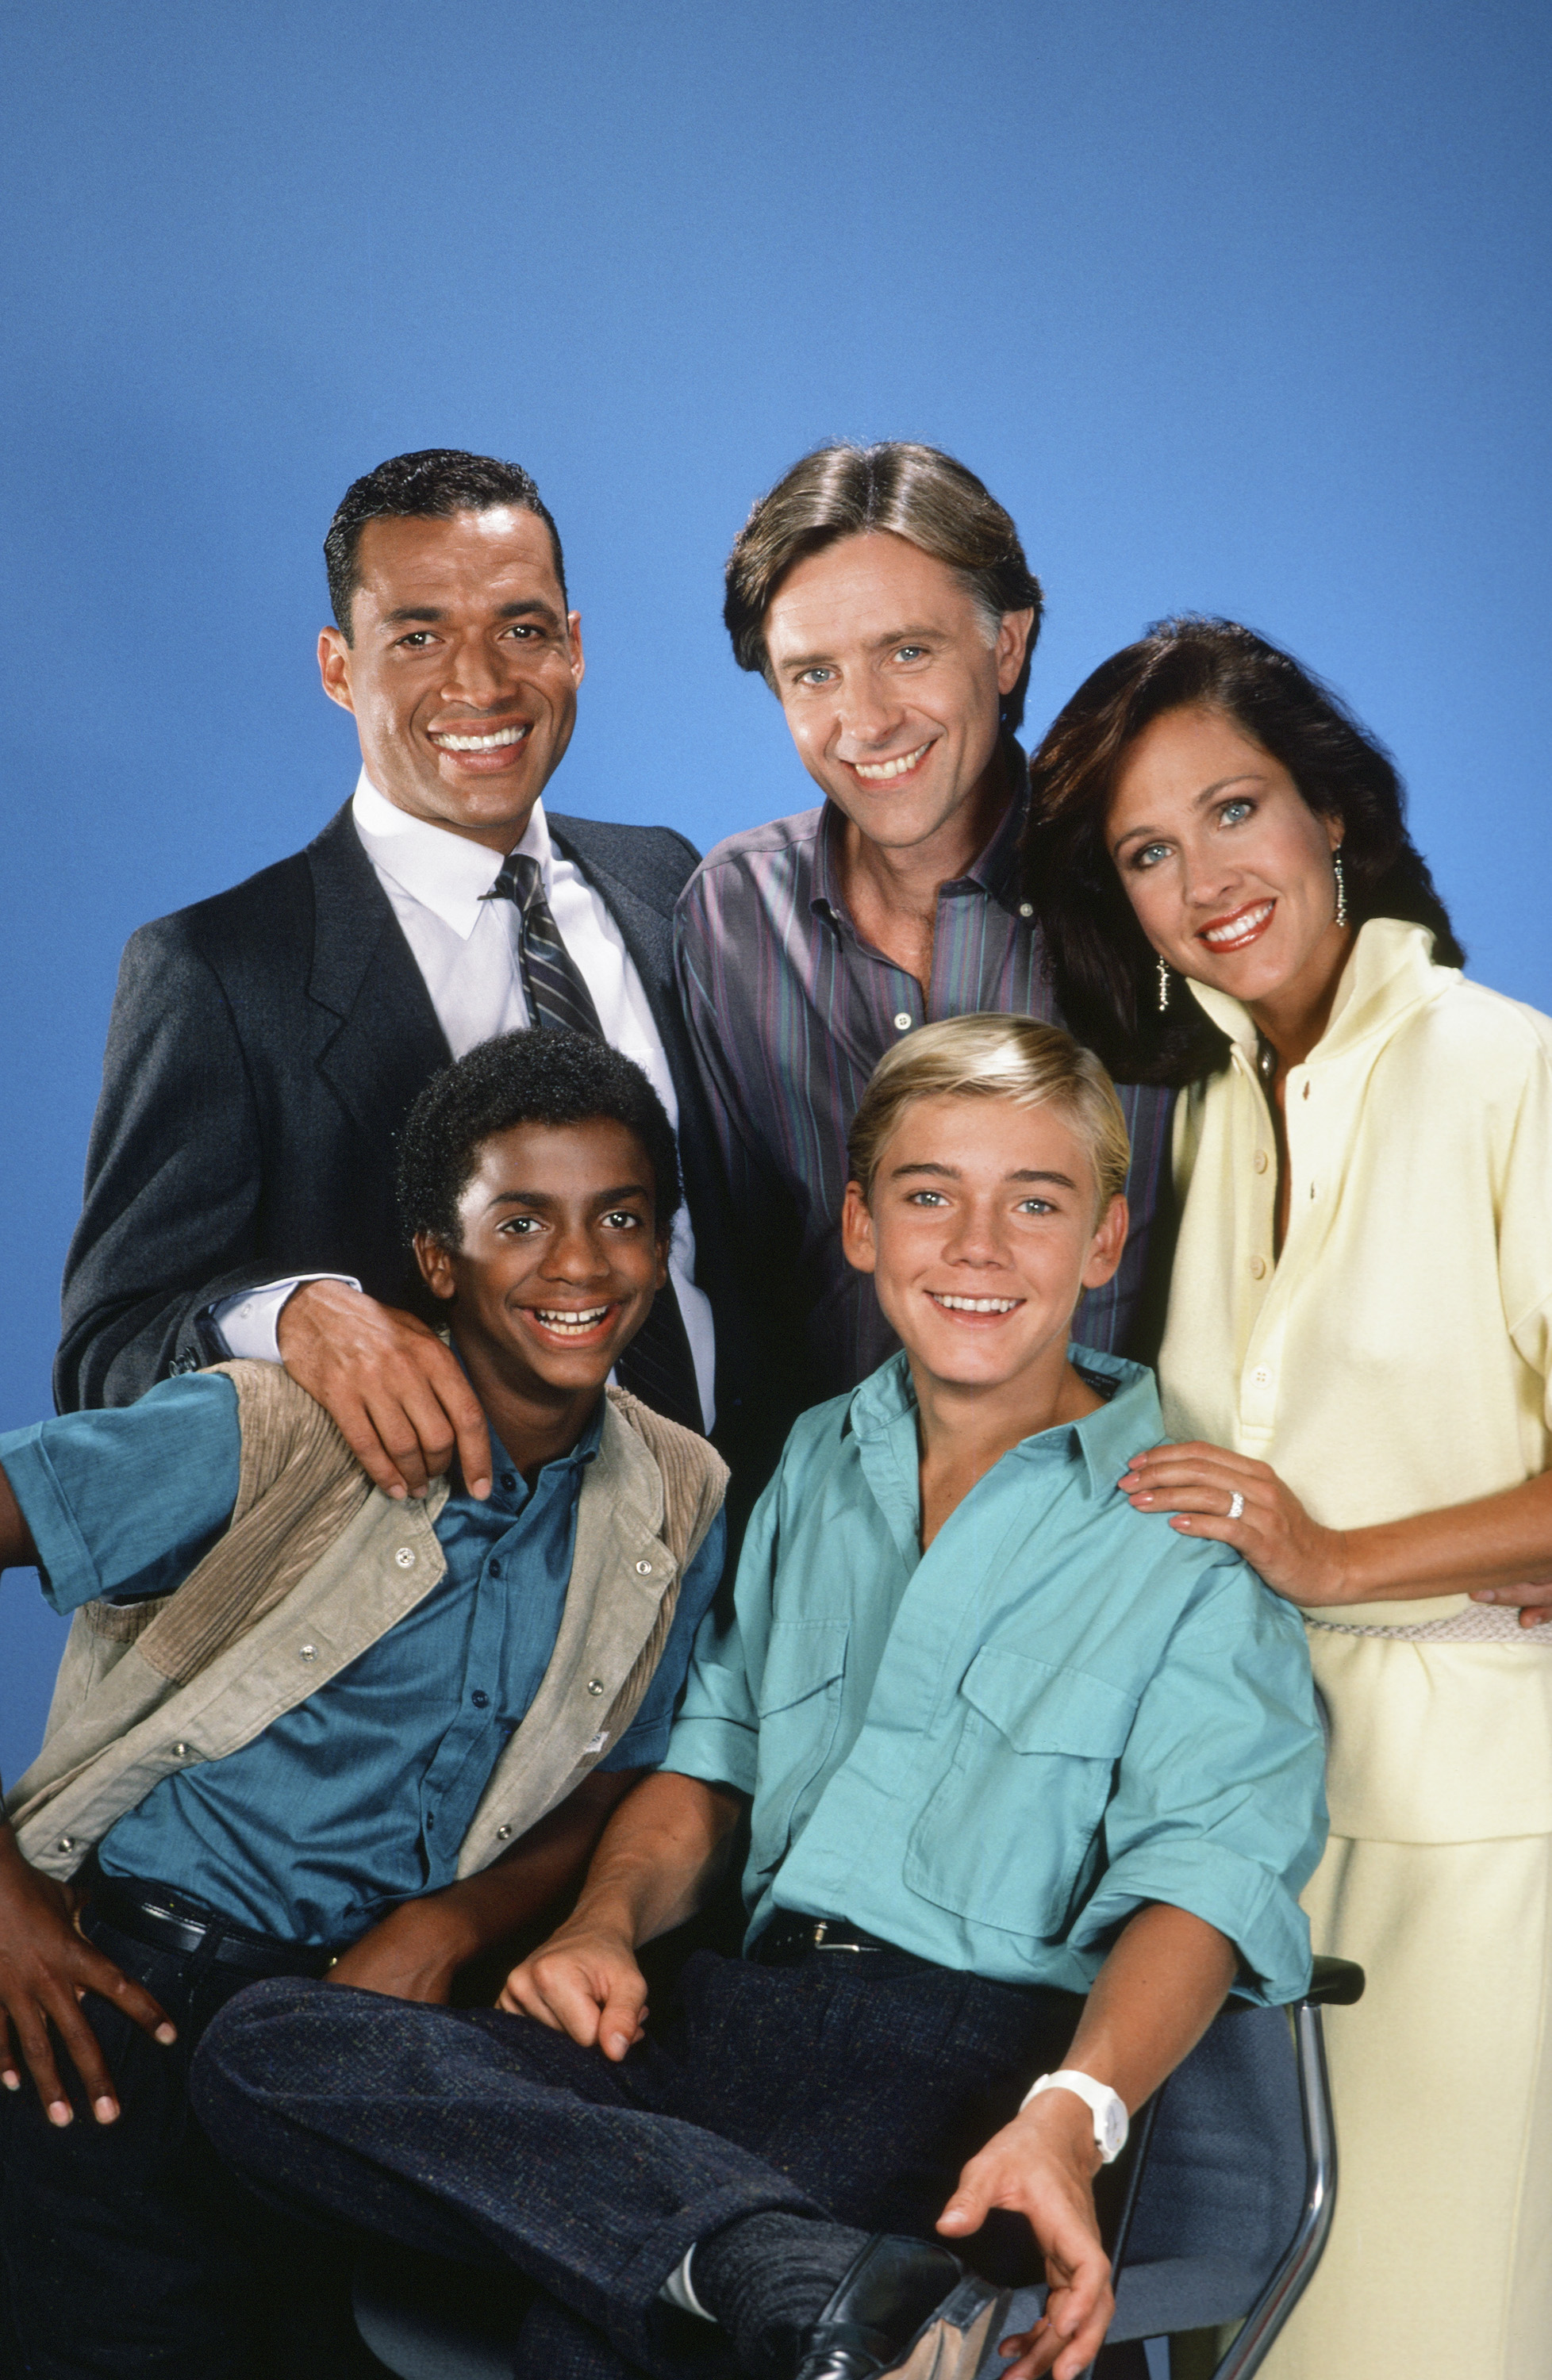 Alfonso Ribeiro, Ricky Shroder, Franklyn Seales, Joel Higgins, and Erin Gray in "Silver Spoons," 1995 | Source: Getty Images